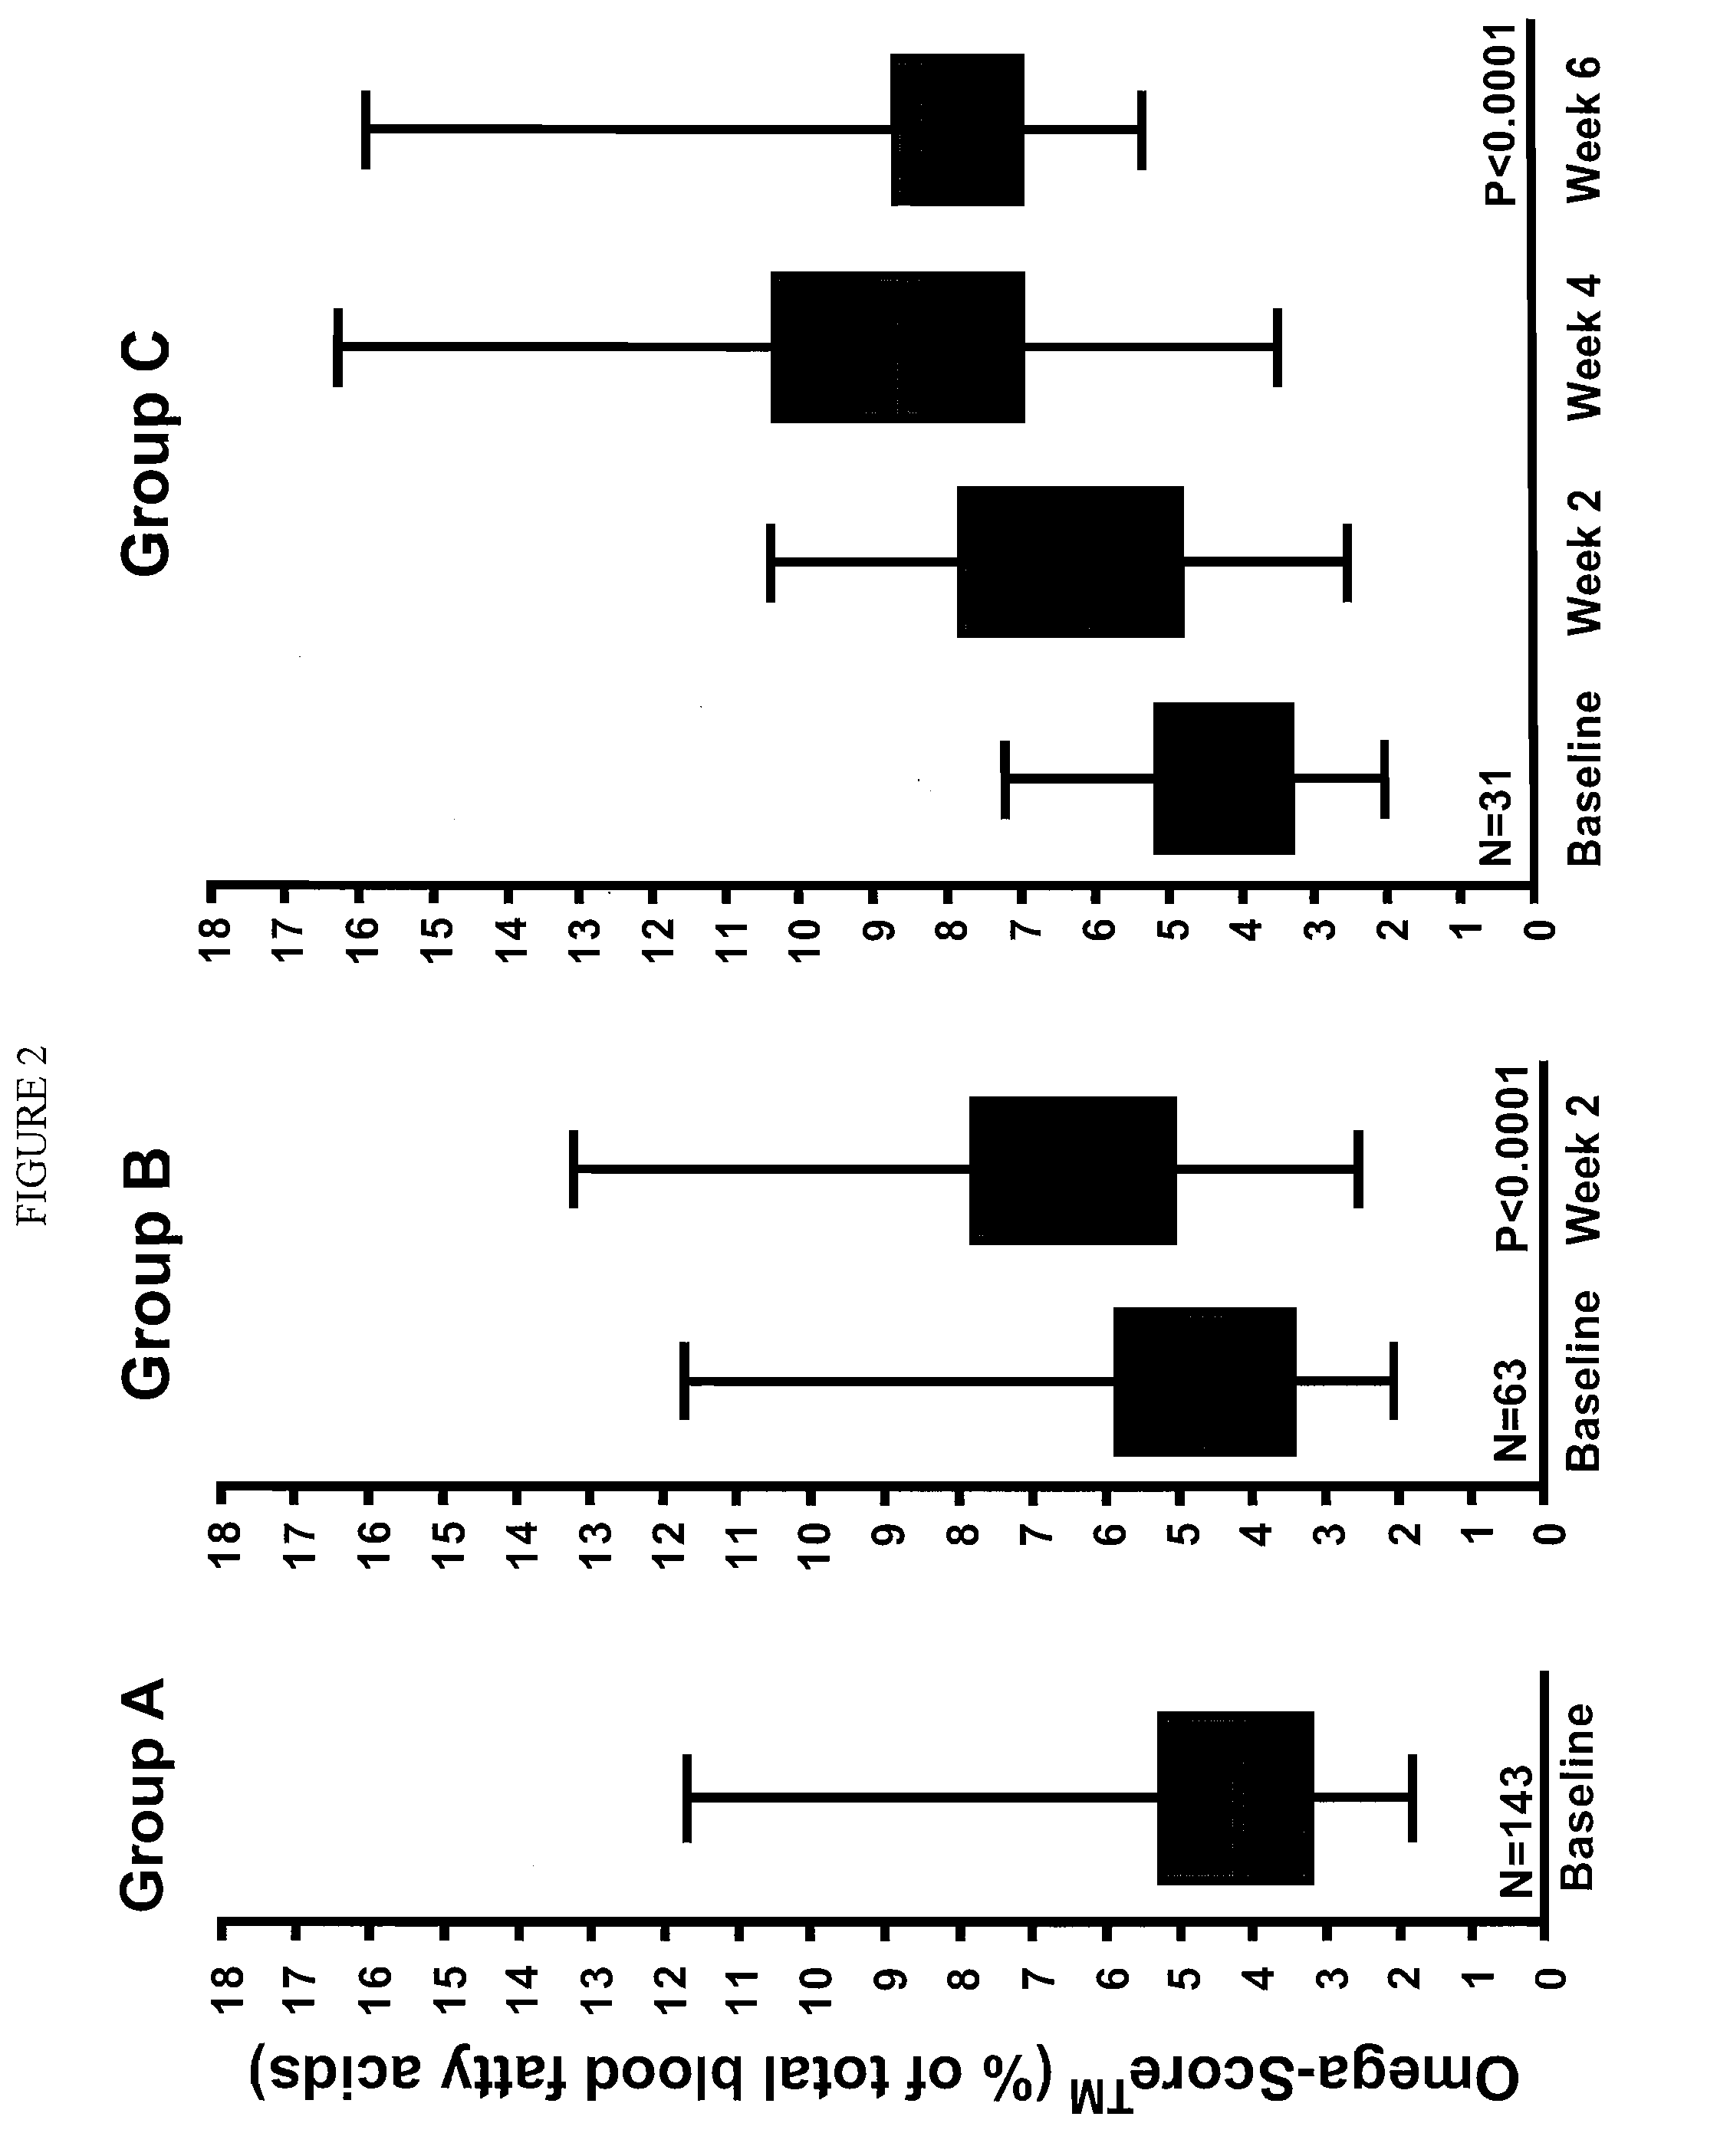 Method for treating obesity with anti-obesity formulations and omega 3 fatty acids for the reduction of body weight in cardiovascular disease patients (CVD) and diabetics